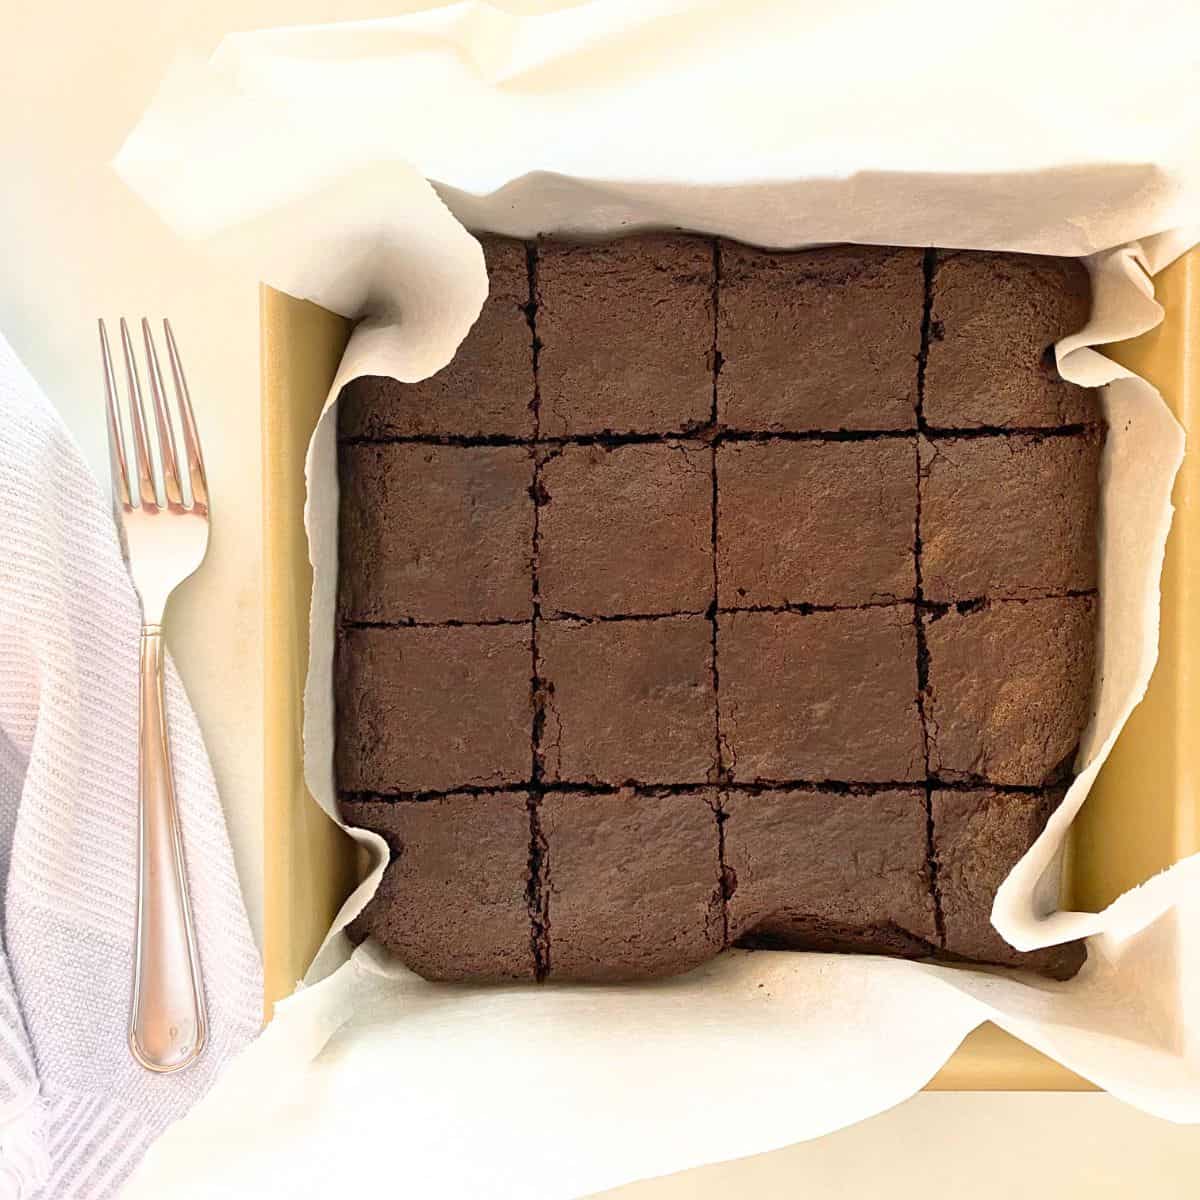 Baked brownies cut into 16 squares in a gold baking pan lined with parchment paper